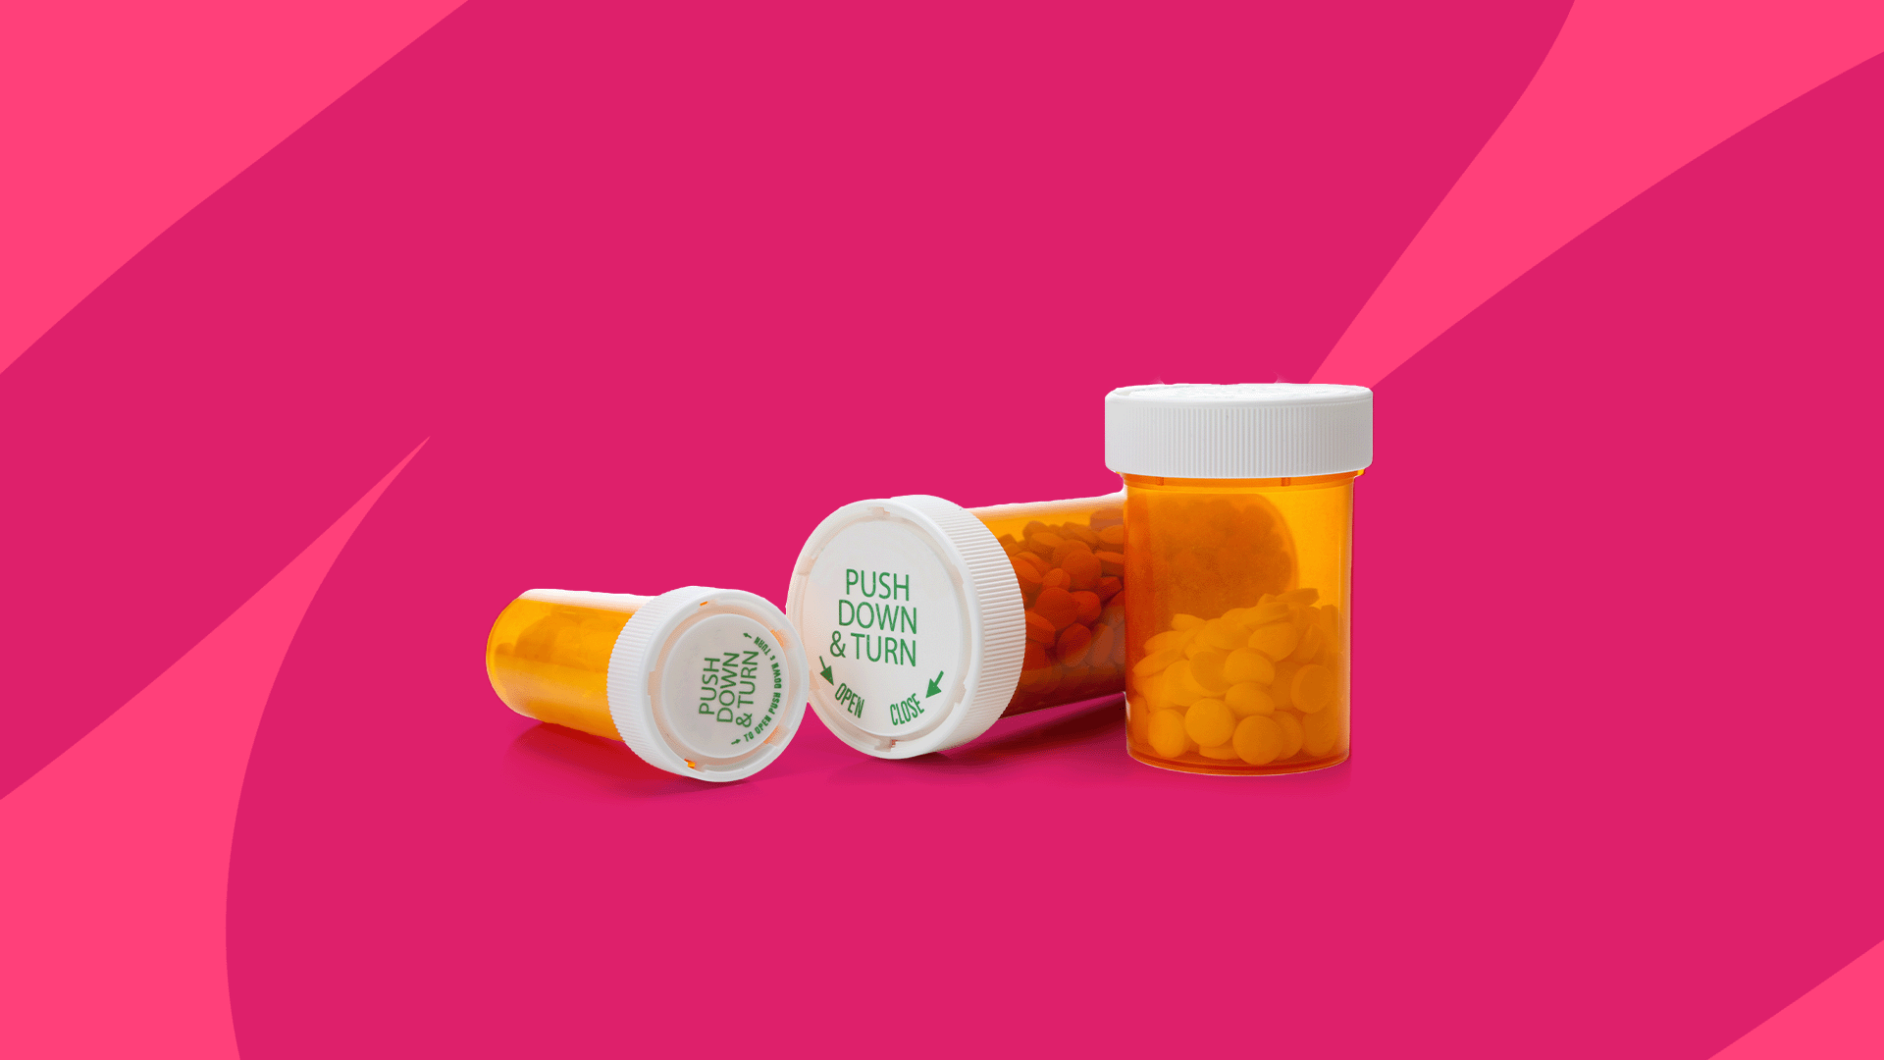 Rx pill bottles: How much is naproxen without insurance?